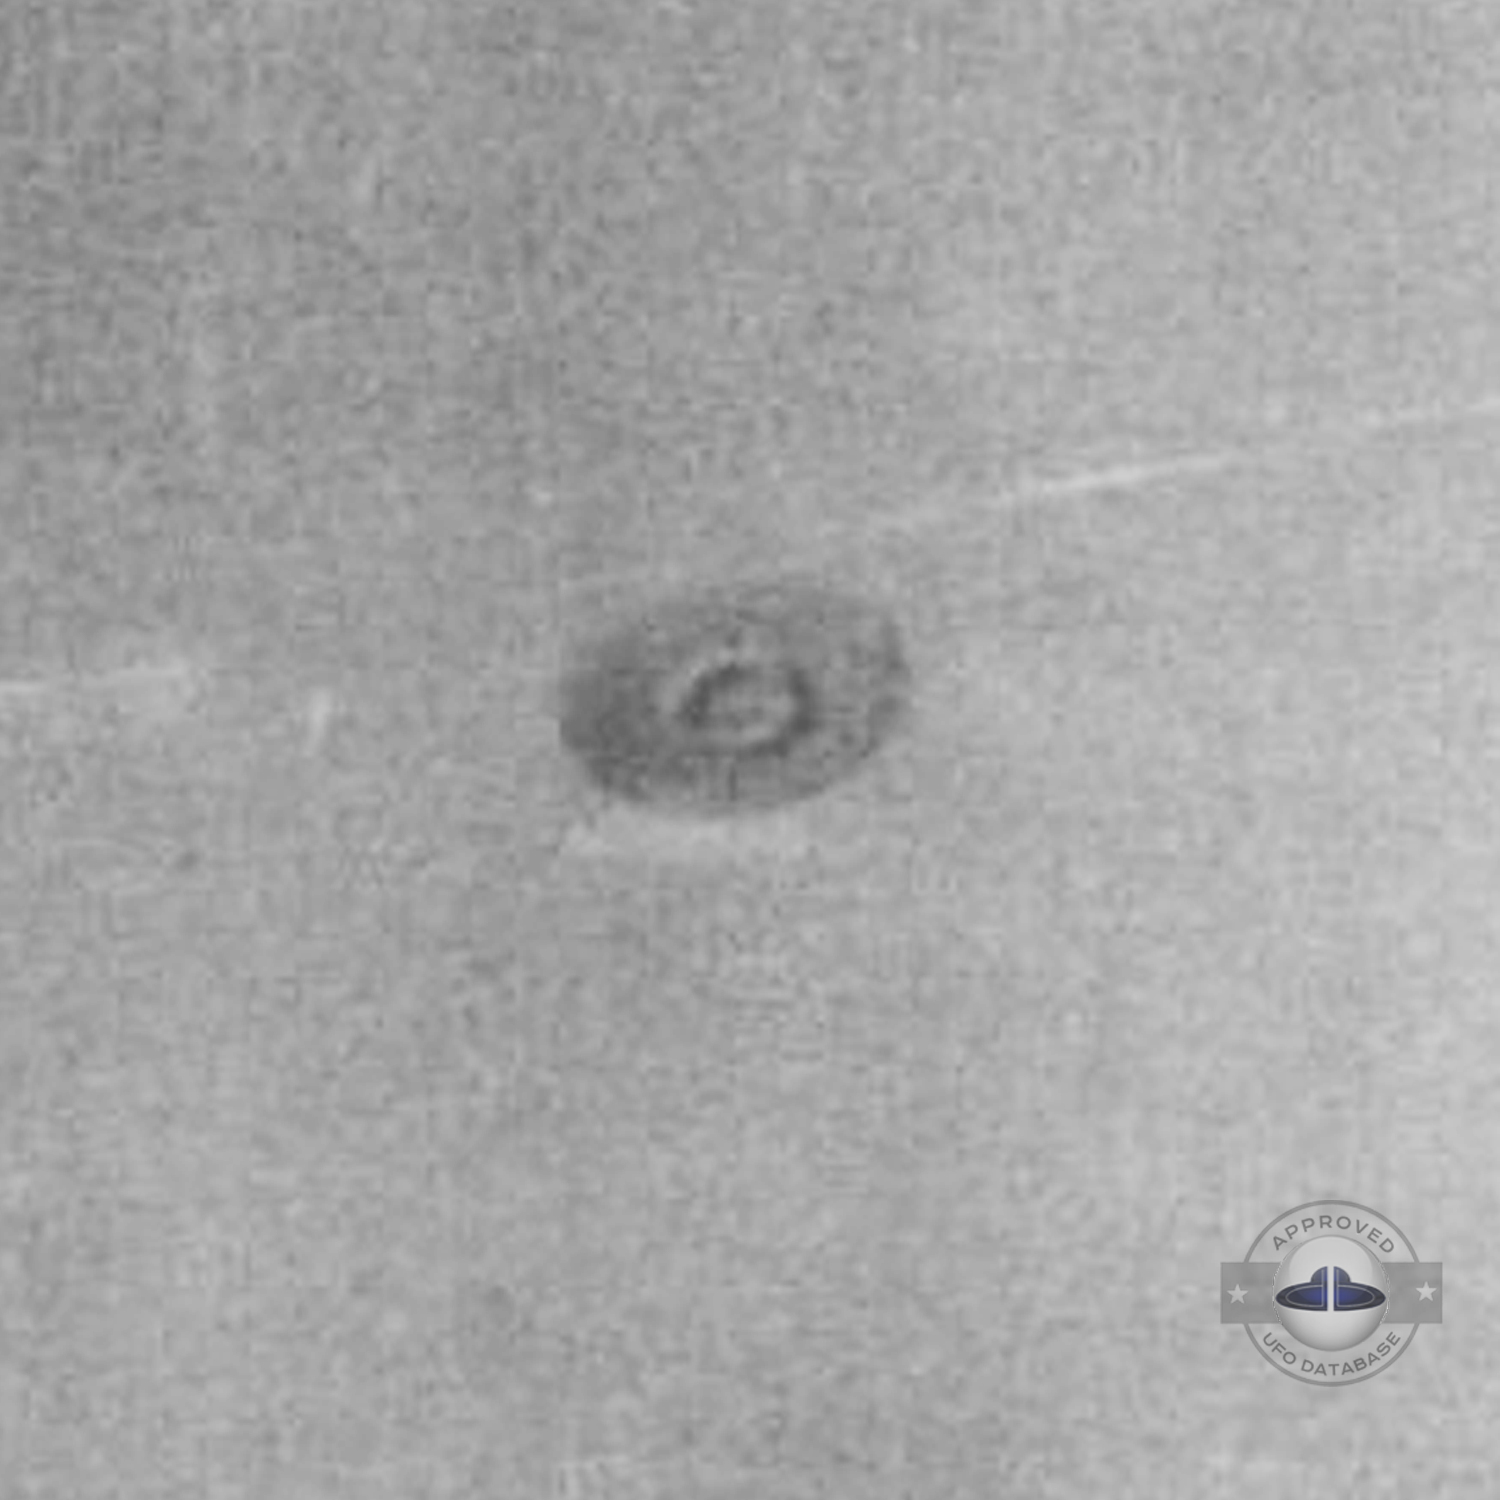 UFO picture considered by A.P.R.O | one of the best ufo picture 1952 UFO Picture #122-5